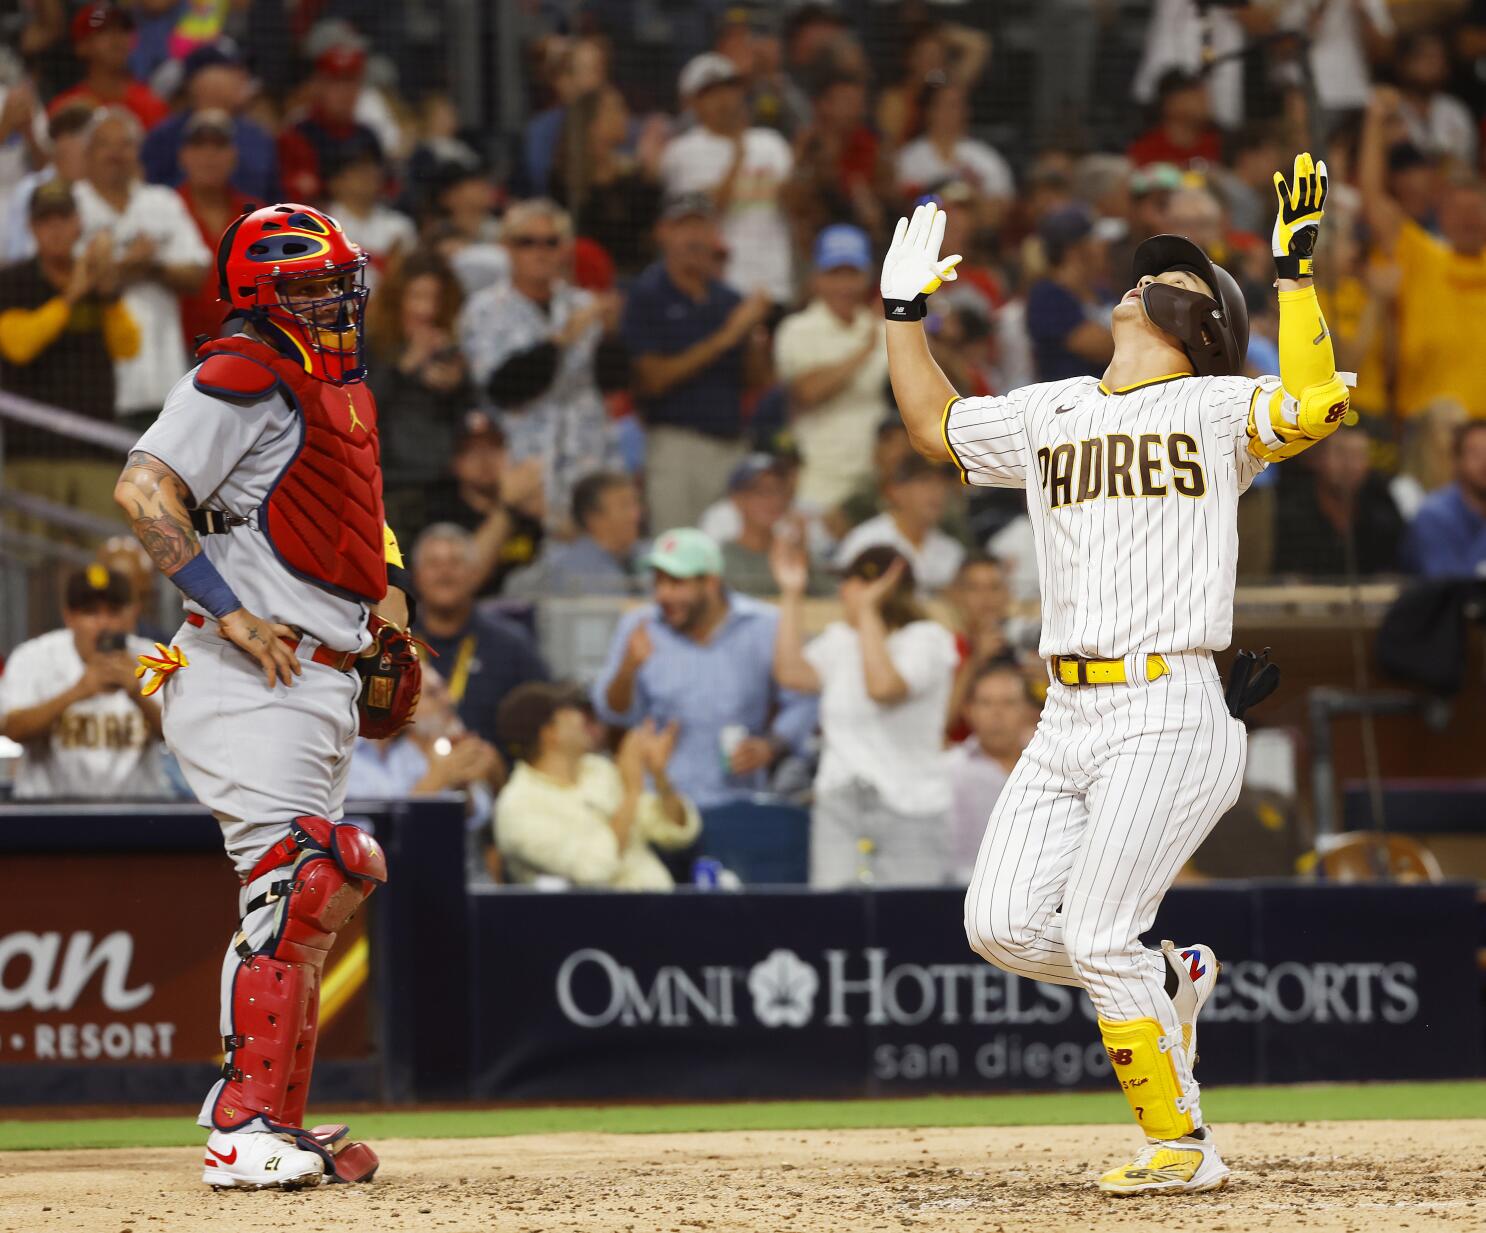 Padres break tie in 13th inning, win 2-1, outlast Cardinals as both lineups  struggle